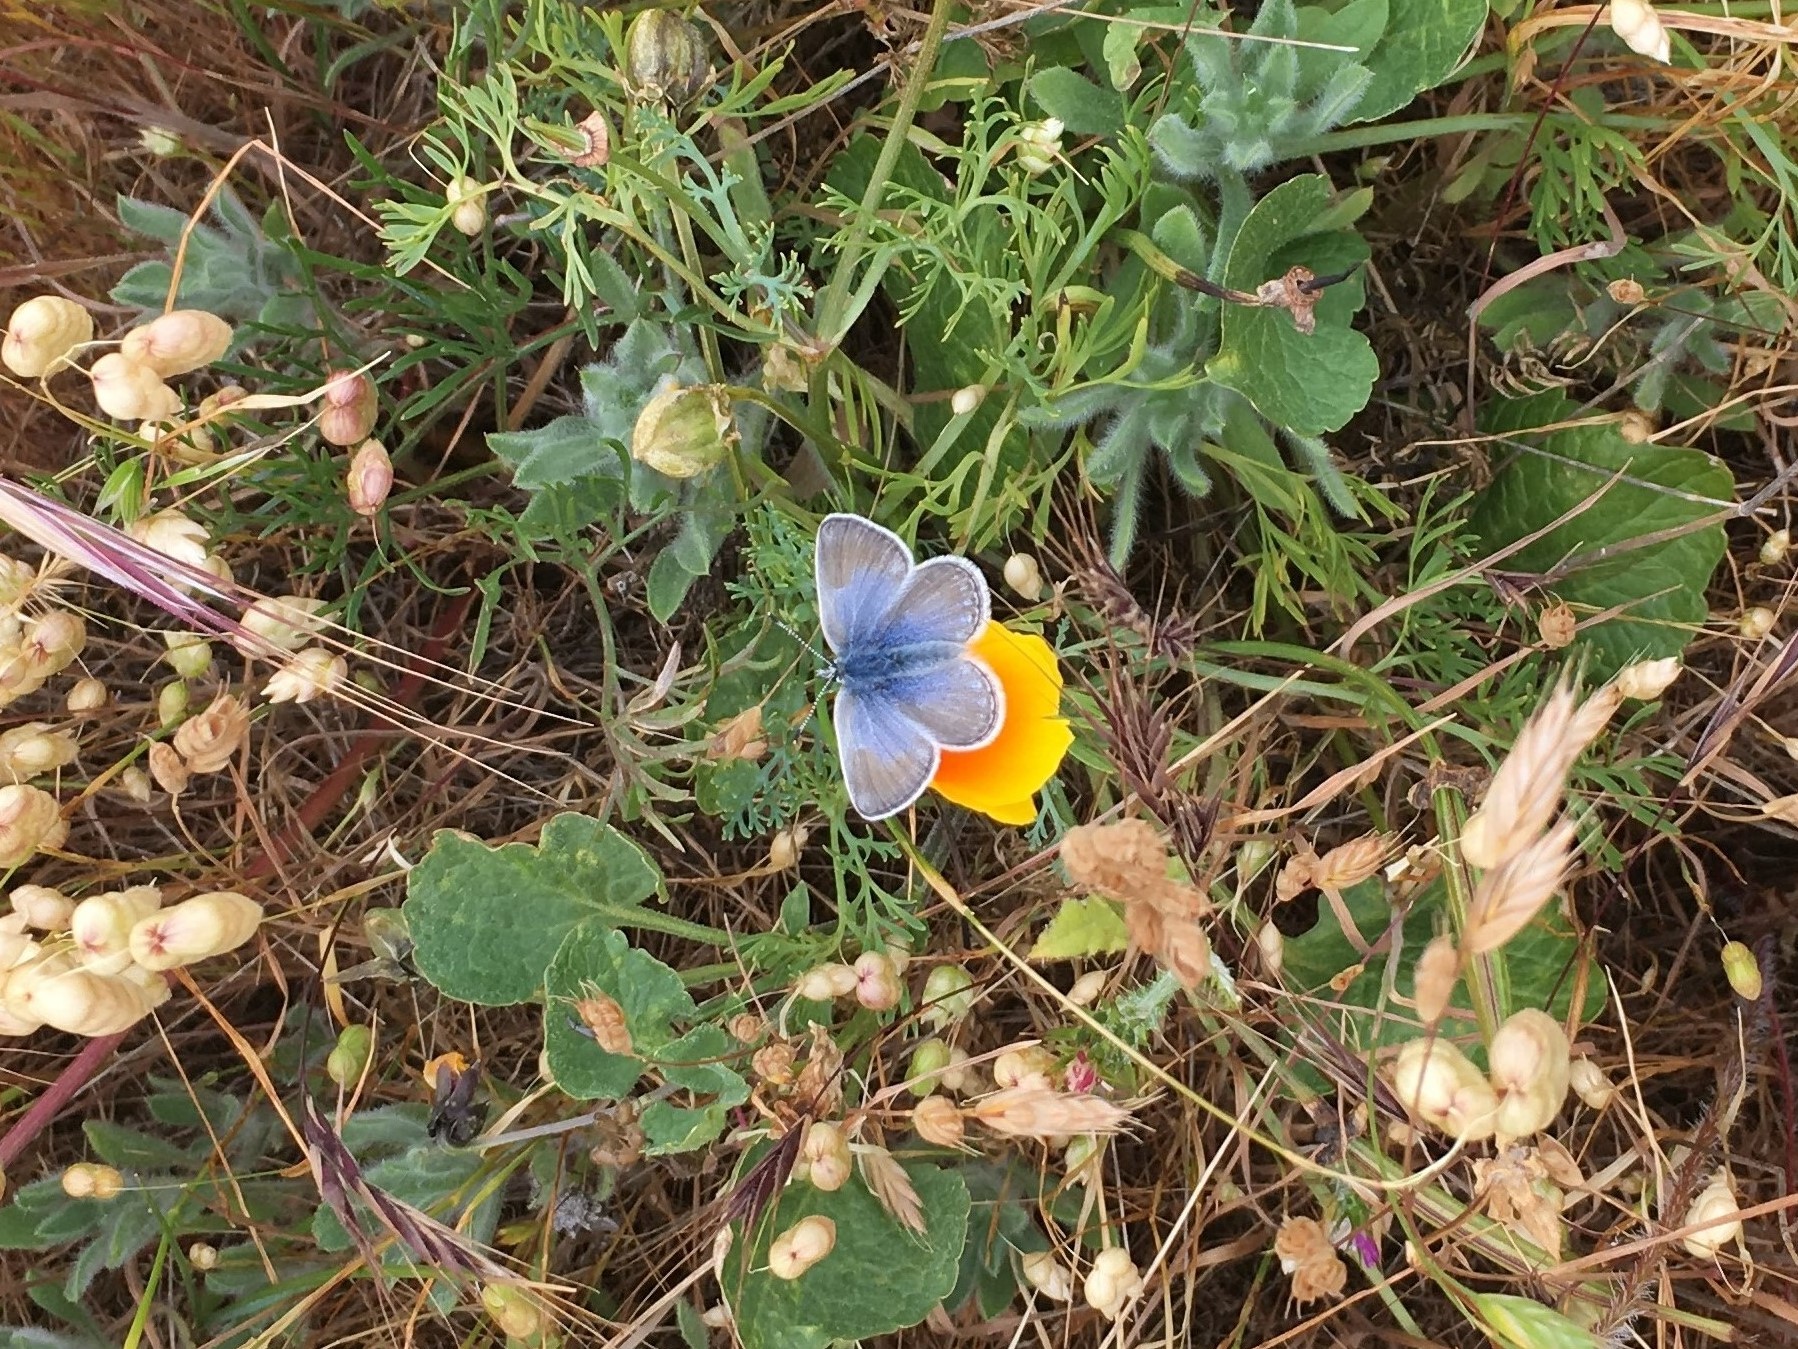 A small light blue butterfly sits on an orange California poppy.